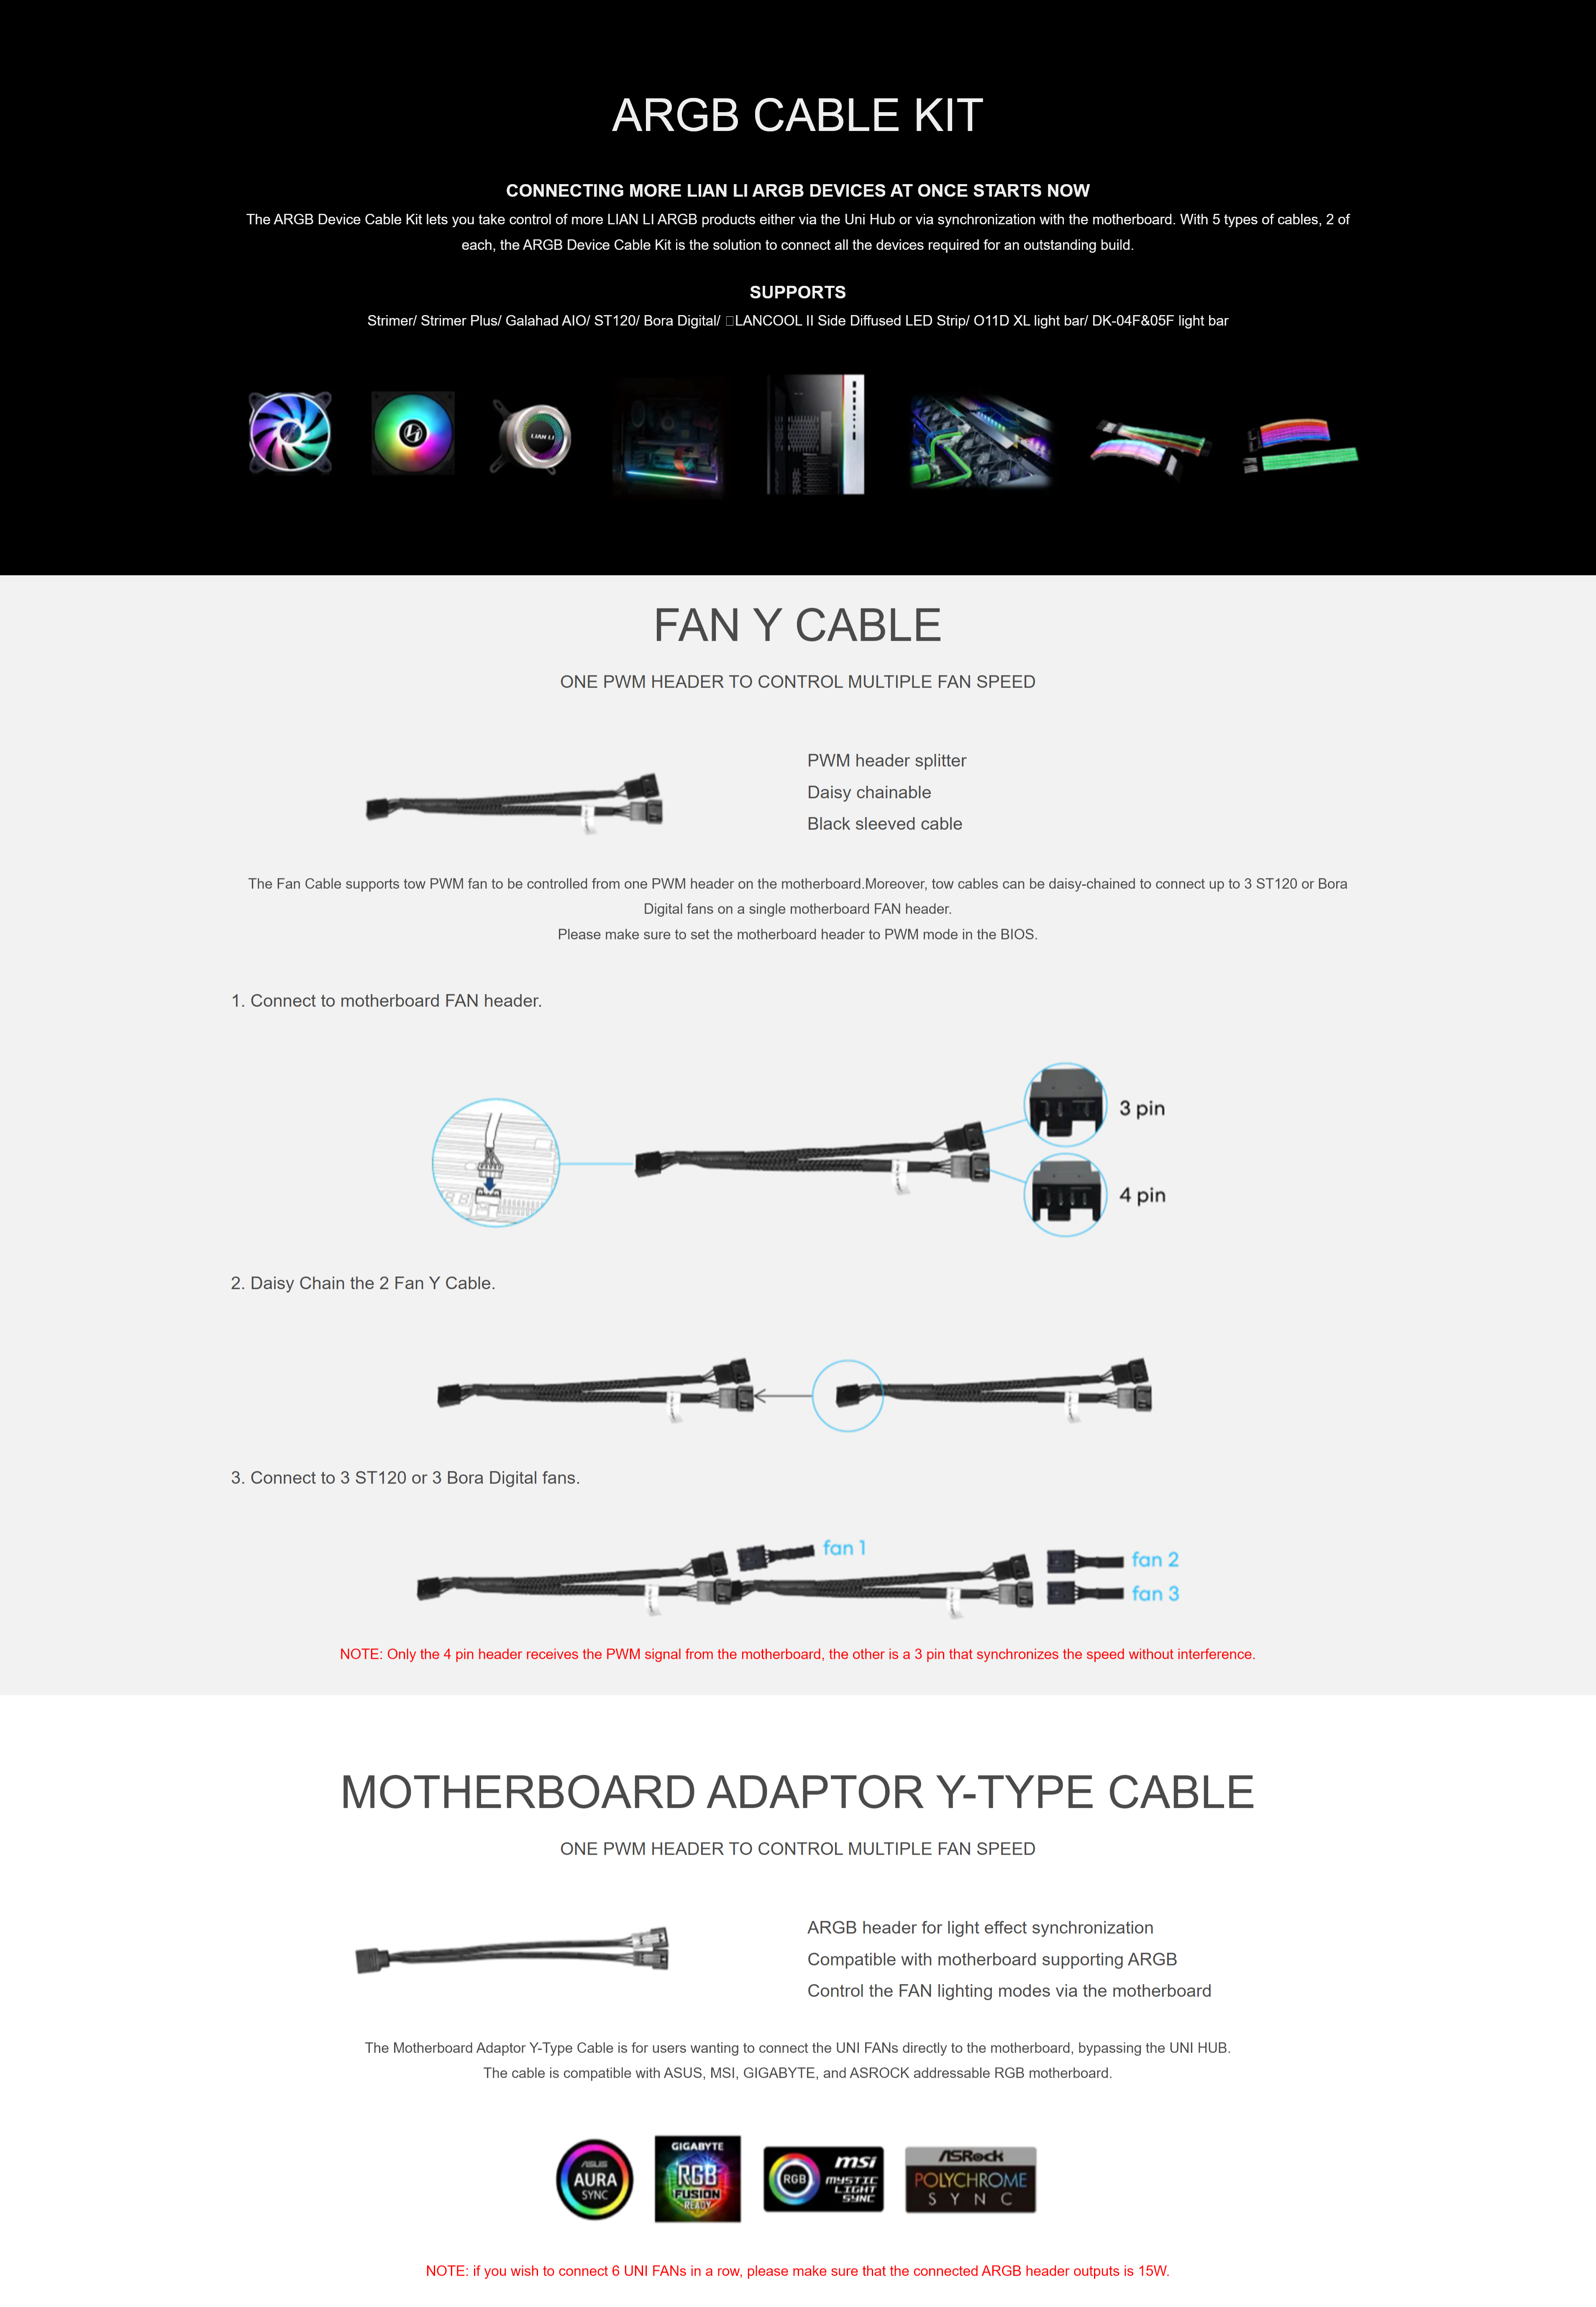 A large marketing image providing additional information about the product Lian-Li ARGB Device Cable Kits for Strimer/Strimer Plus/Galahad AIO/ST120 - Additional alt info not provided